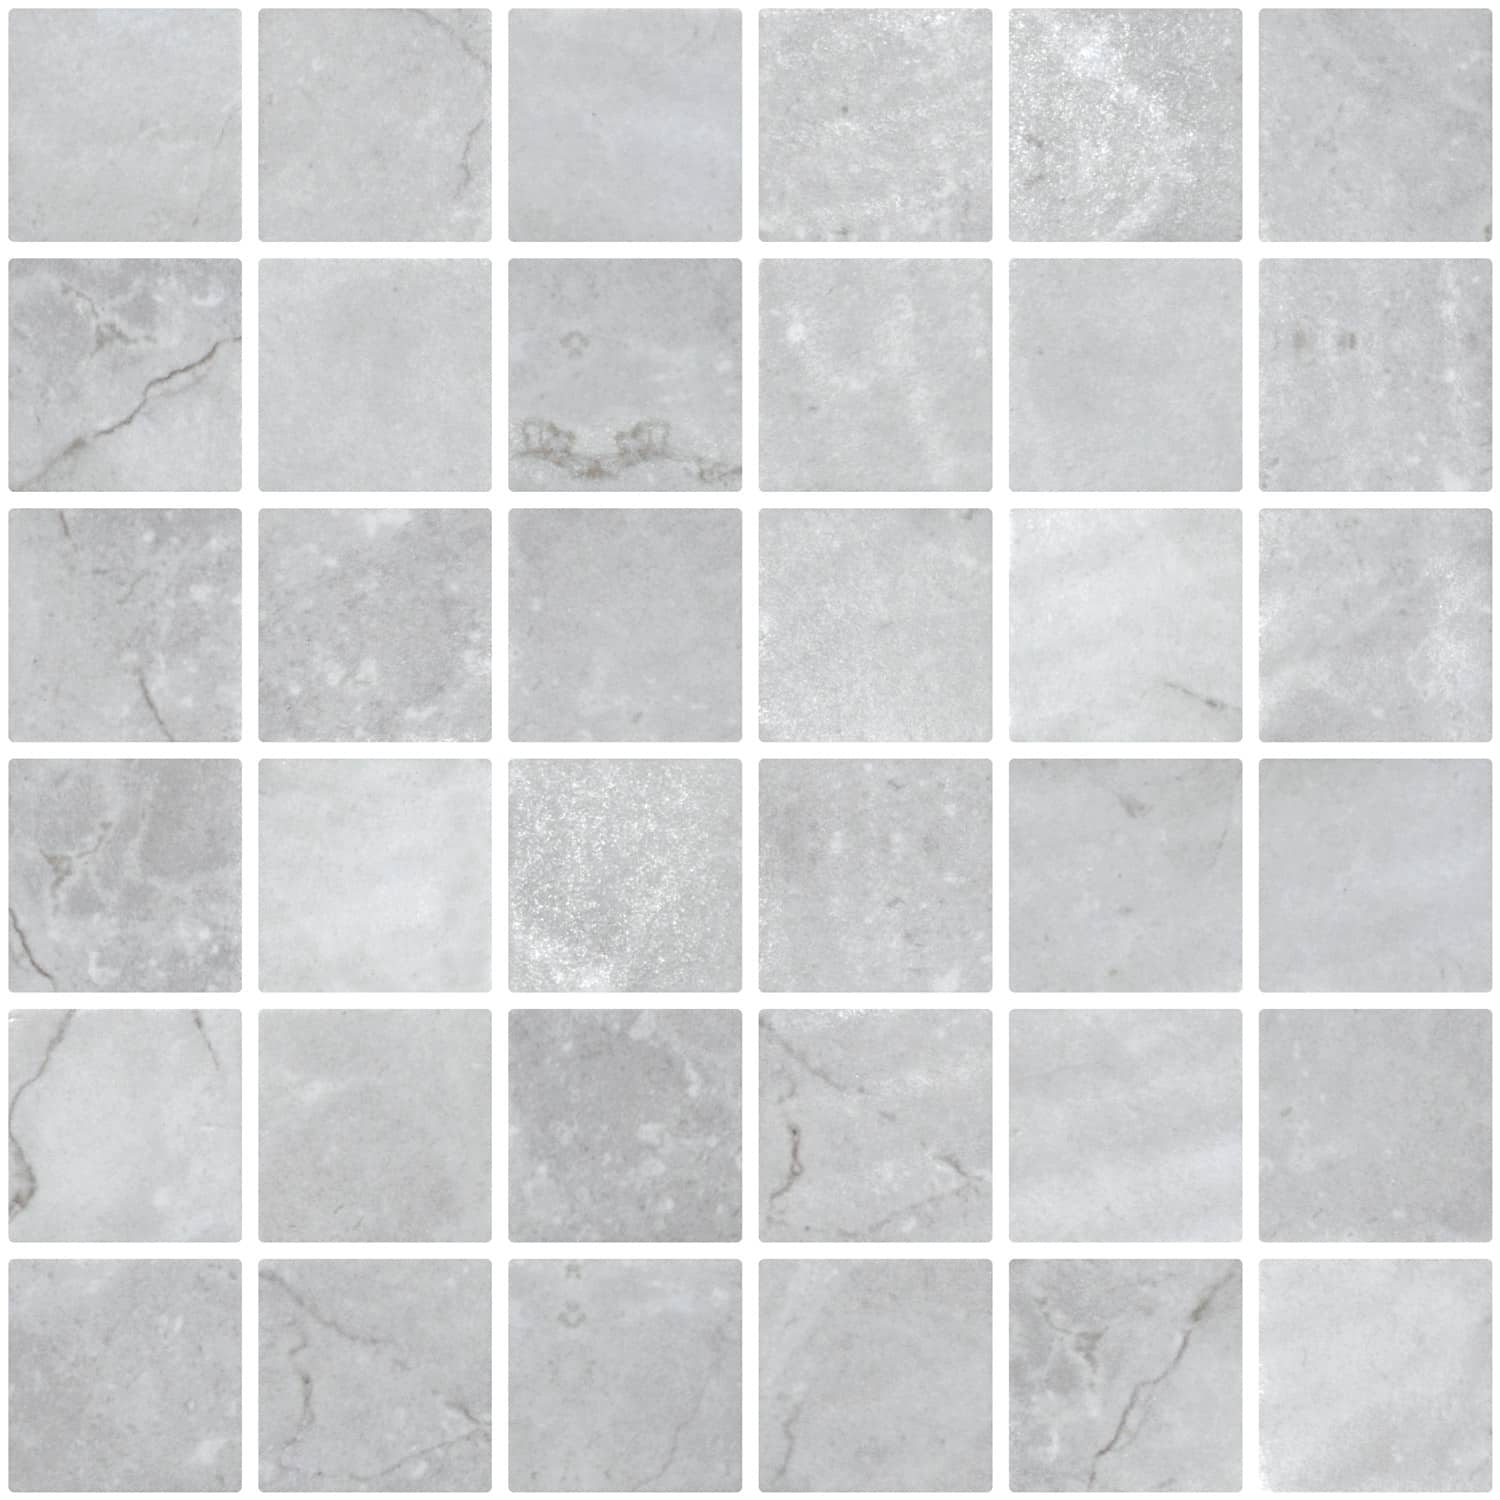 PENTA GREIGE MATTE_RMS TRADERS_NATURAL STONE POOL MOSAIC SUPPLIER MELBOURNE (4)